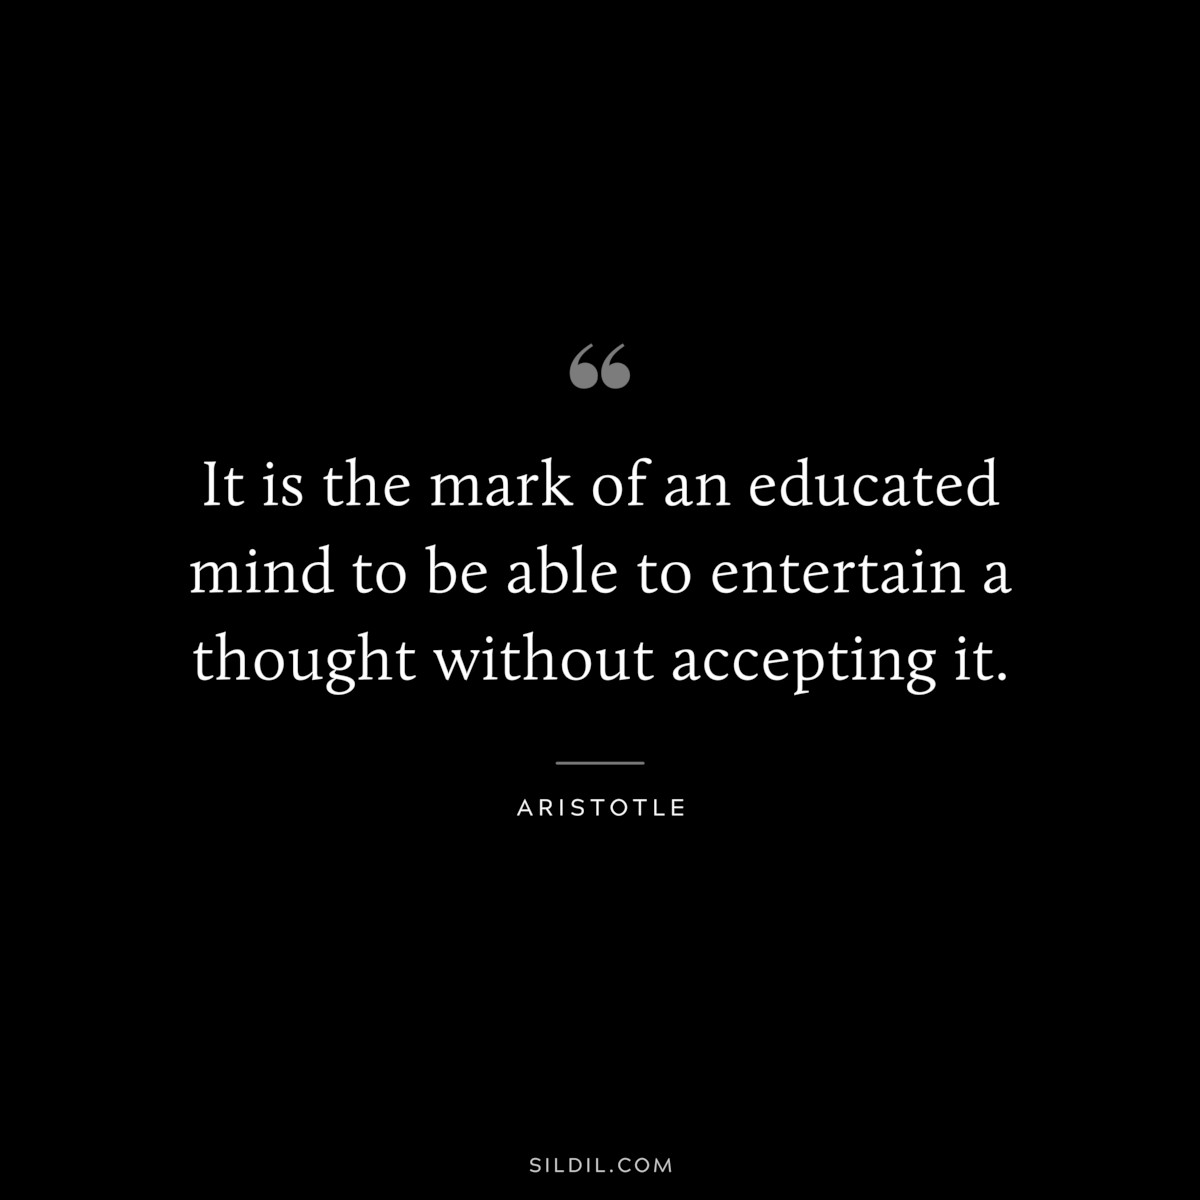 It is the mark of an educated mind to be able to entertain a thought without accepting it. ― Aristotle